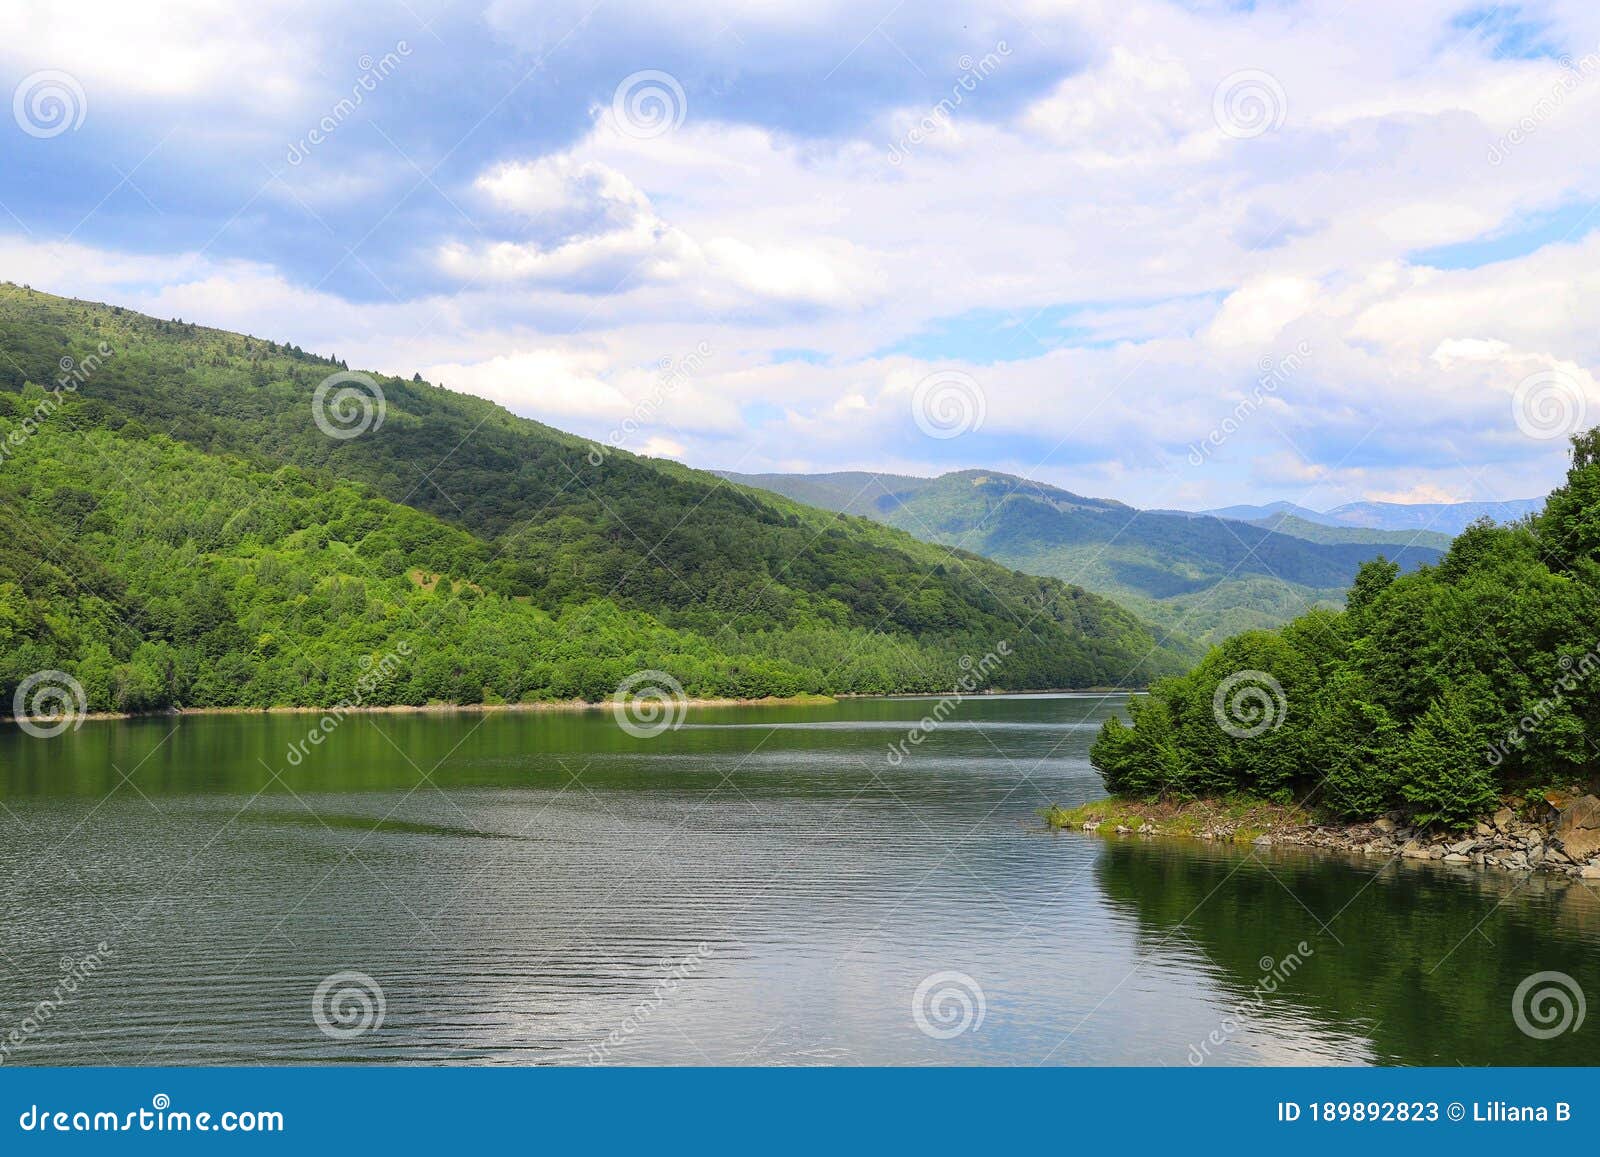 wonderful lake with clouds and a lot of vegetation all around. beautiful valley.